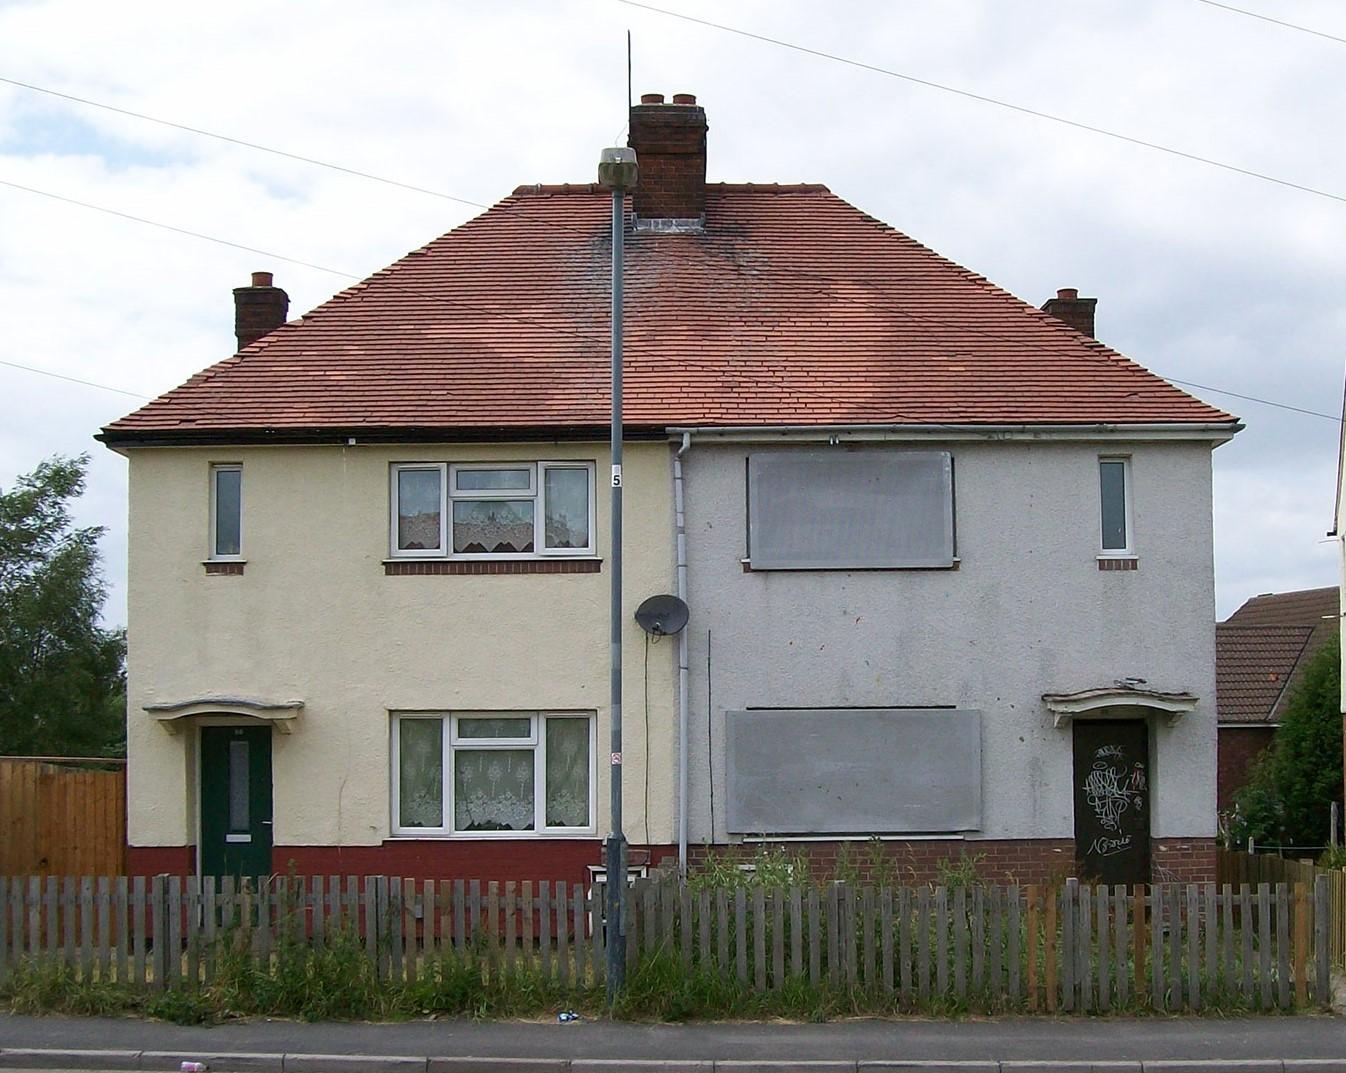 Terraced houses. One appears empty with boarded up windows and doors.